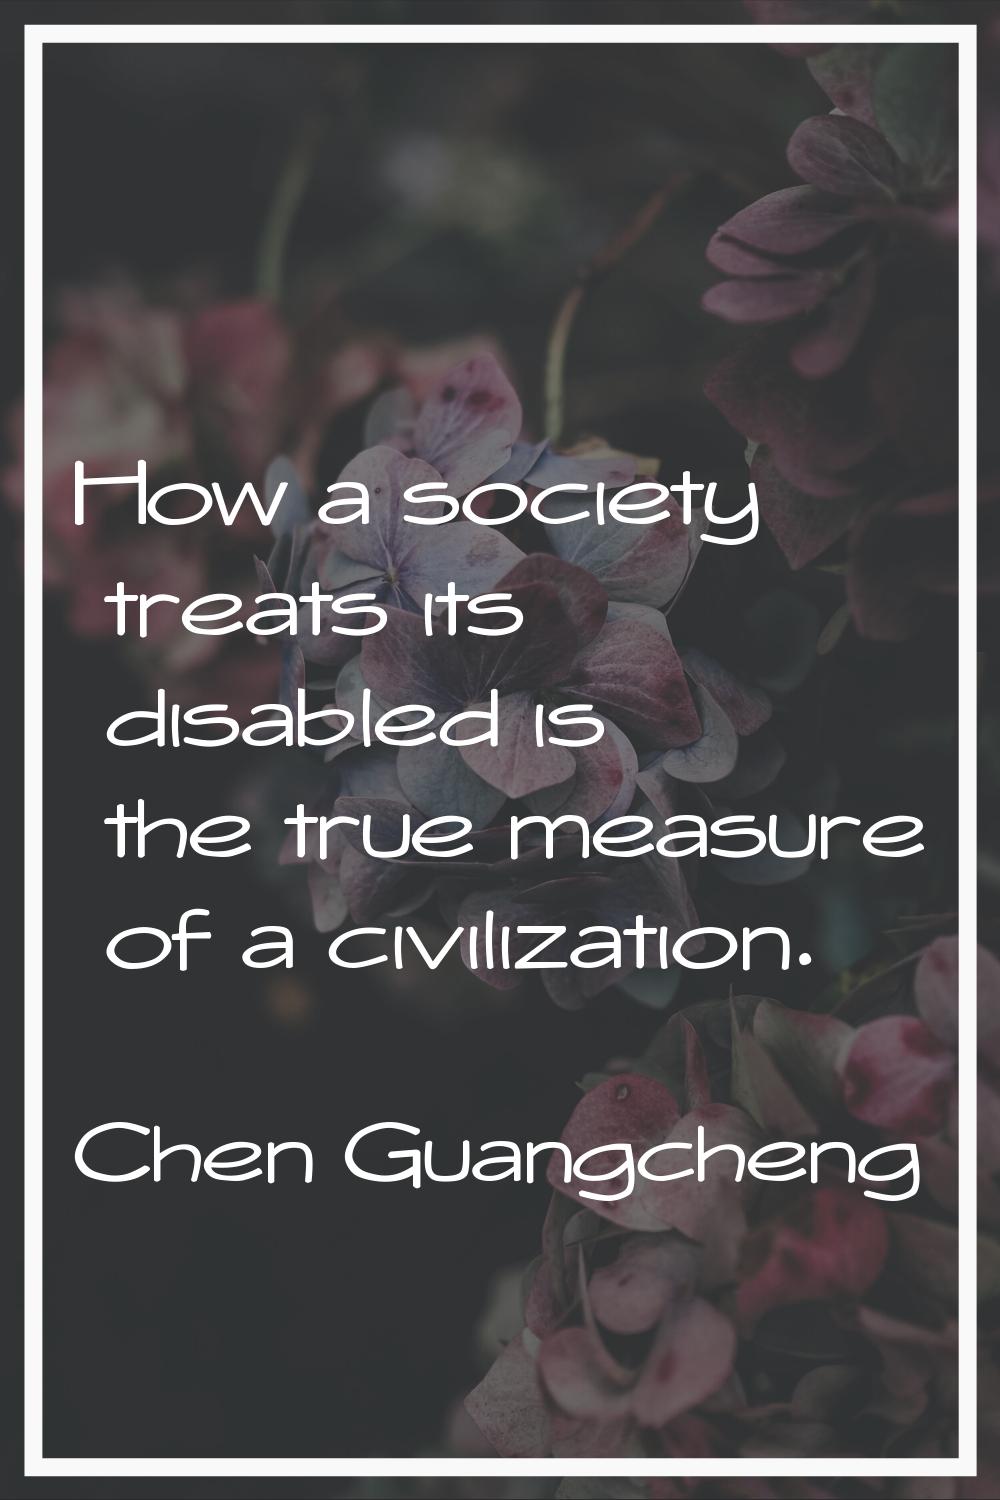 How a society treats its disabled is the true measure of a civilization.